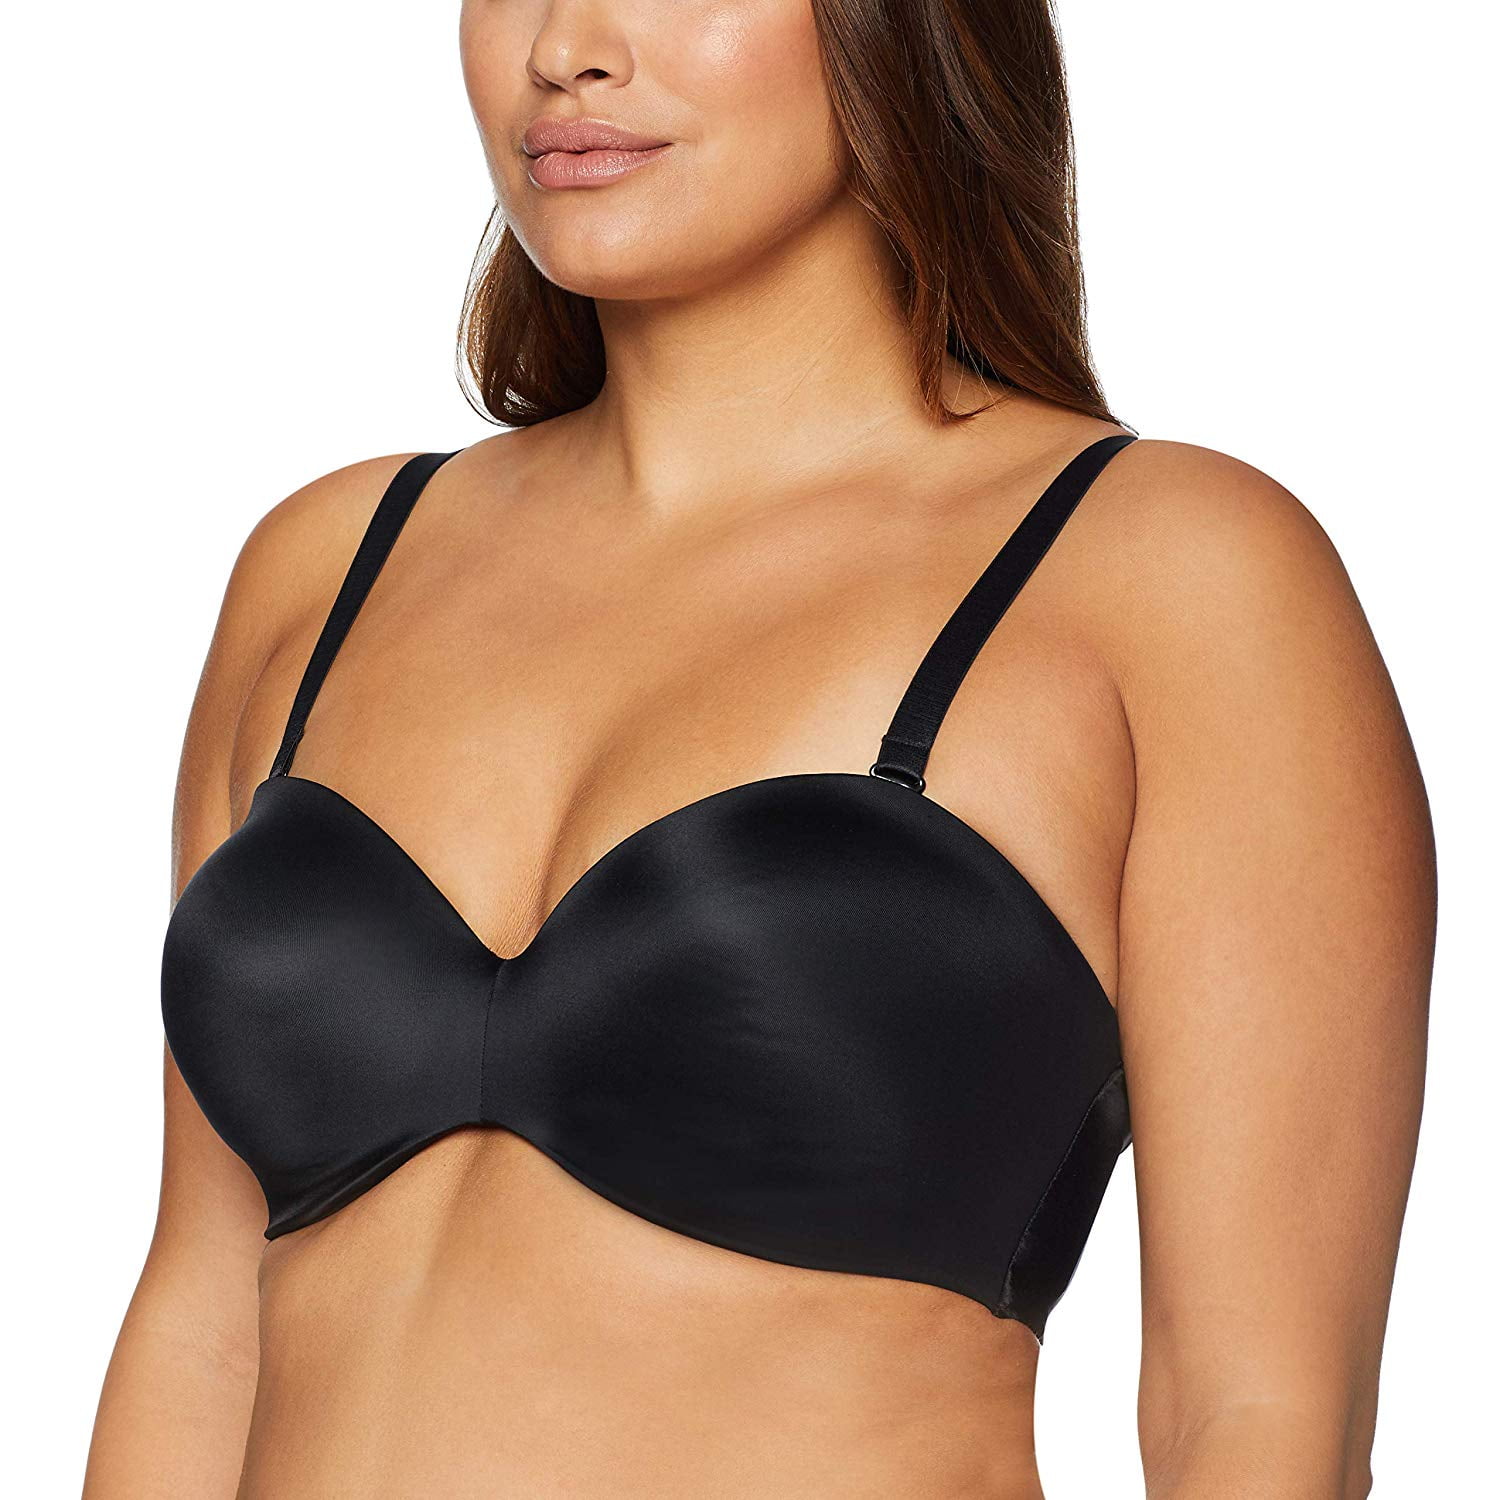 CURVY COUTURE Black Smooth Multi-Way Strapless Bra, US 38DD, NWOT